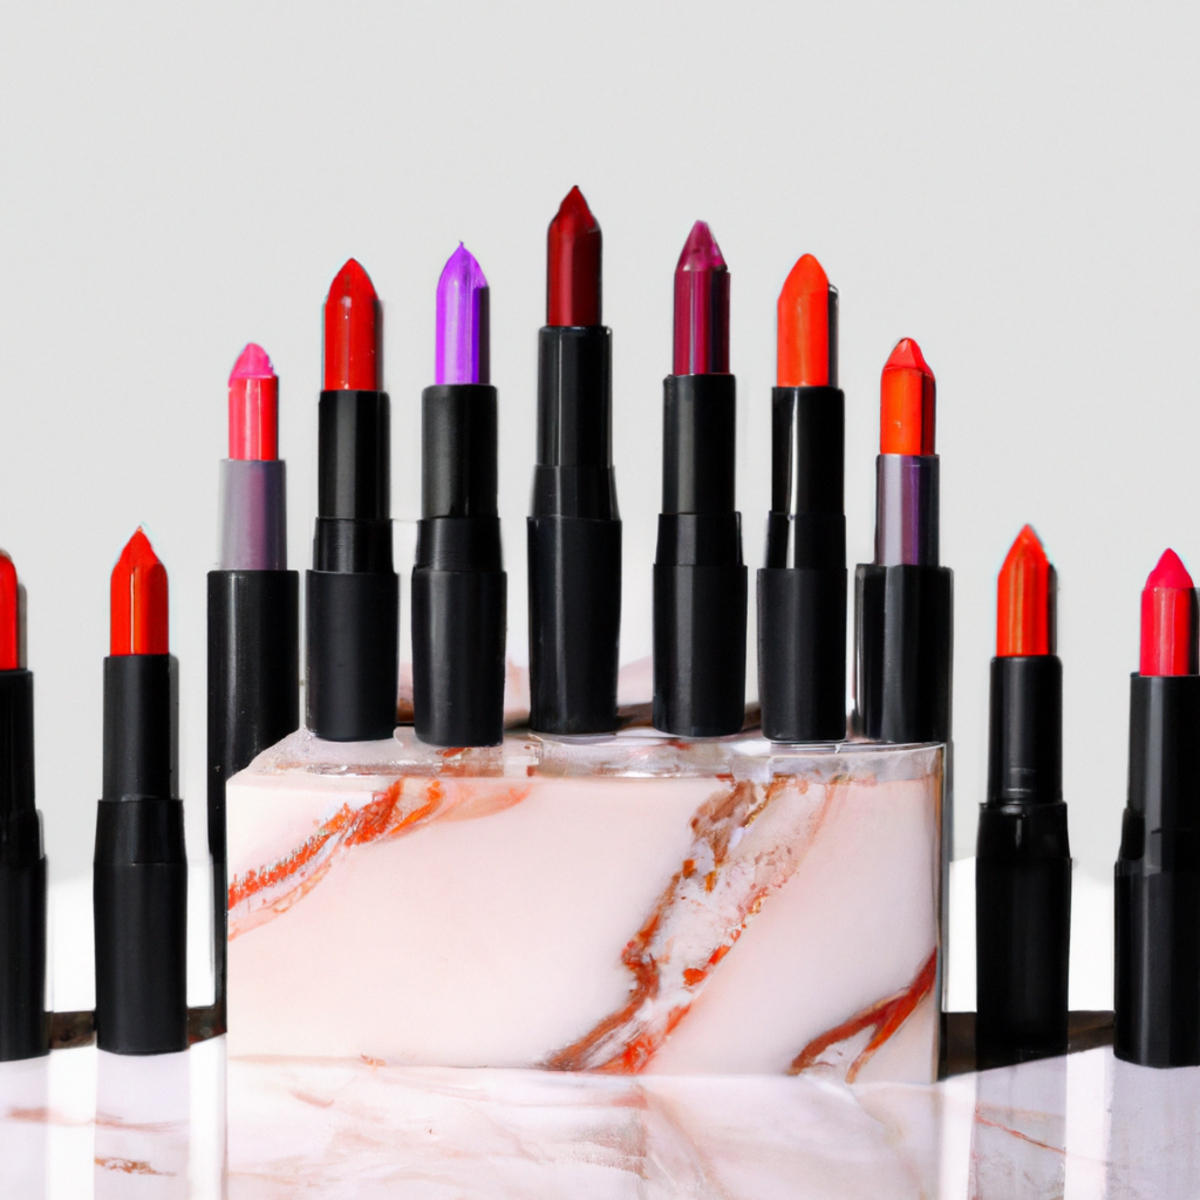 Bold lip colors - Vibrant lipsticks on marble countertop, exuding confidence and allure. Glossy texture and visually pleasing arrangement.